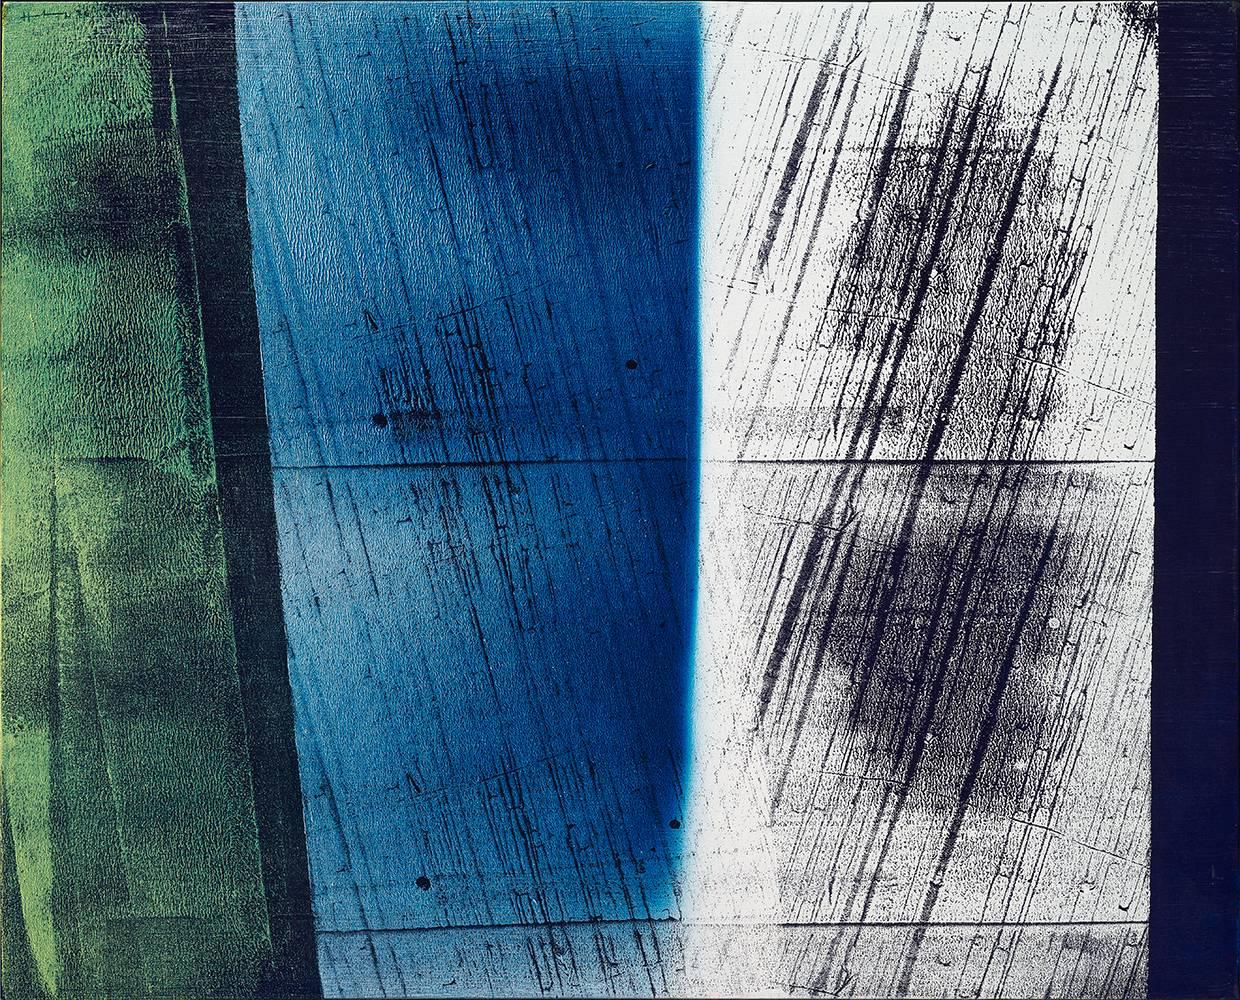 T1976-R1 - Painting by Hans Hartung